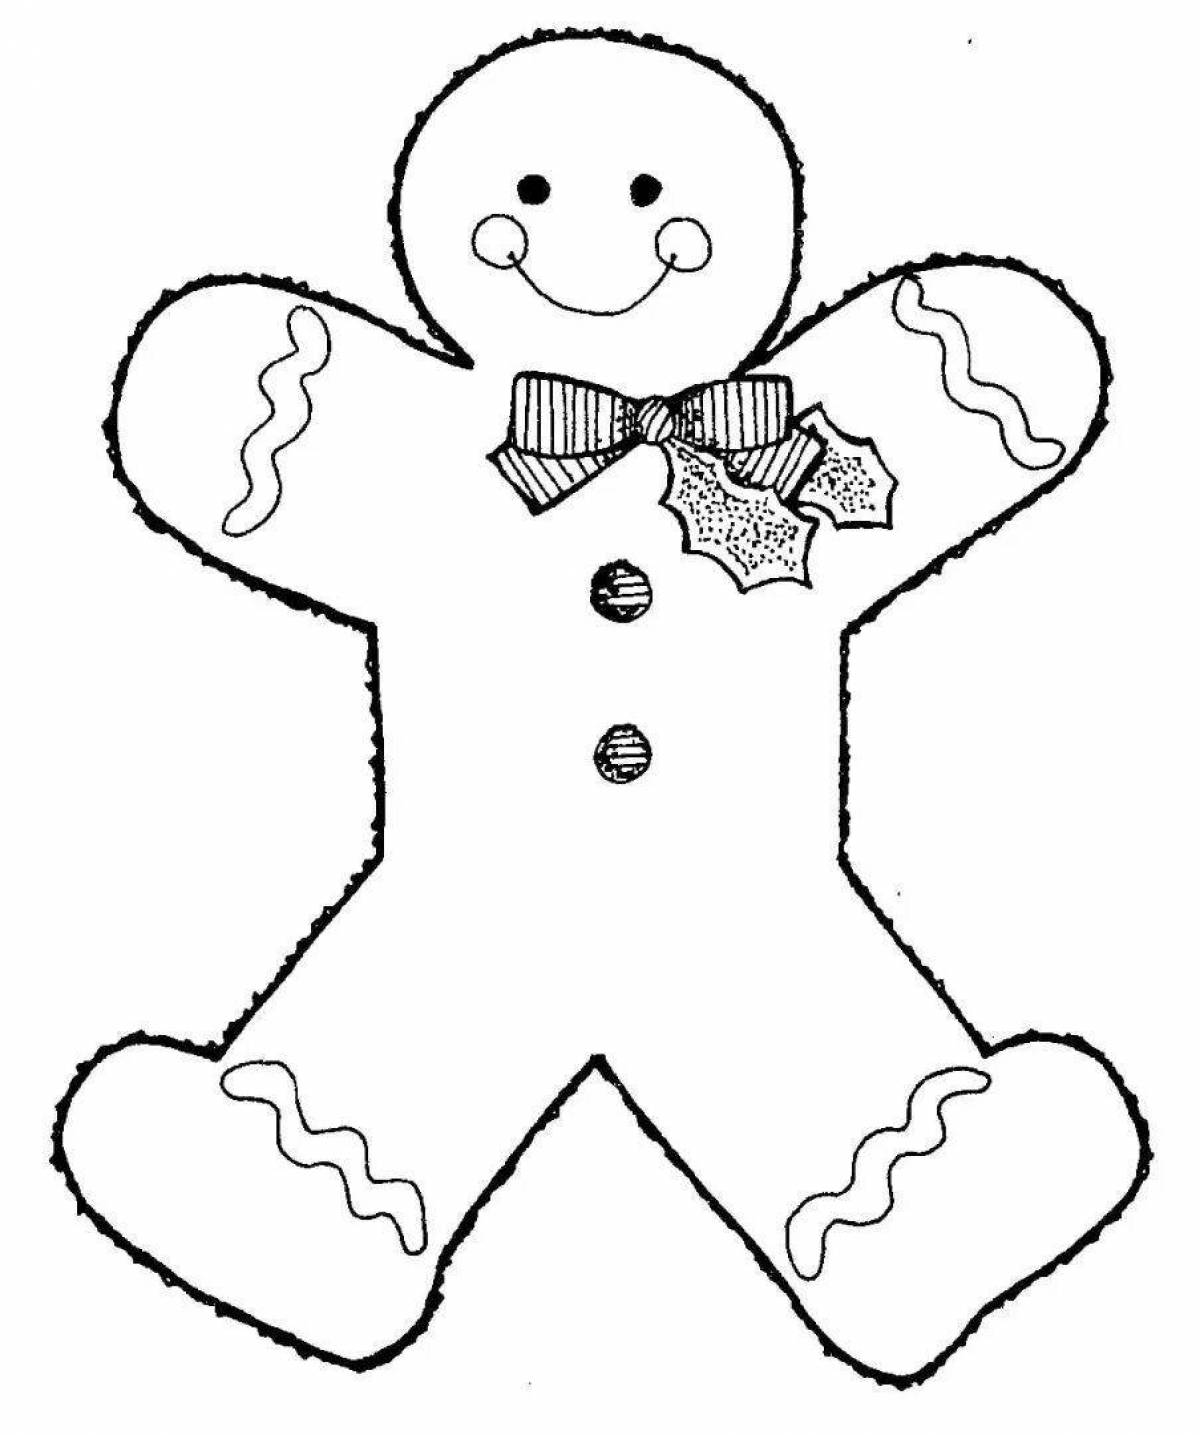 Delightful Christmas cookie coloring book